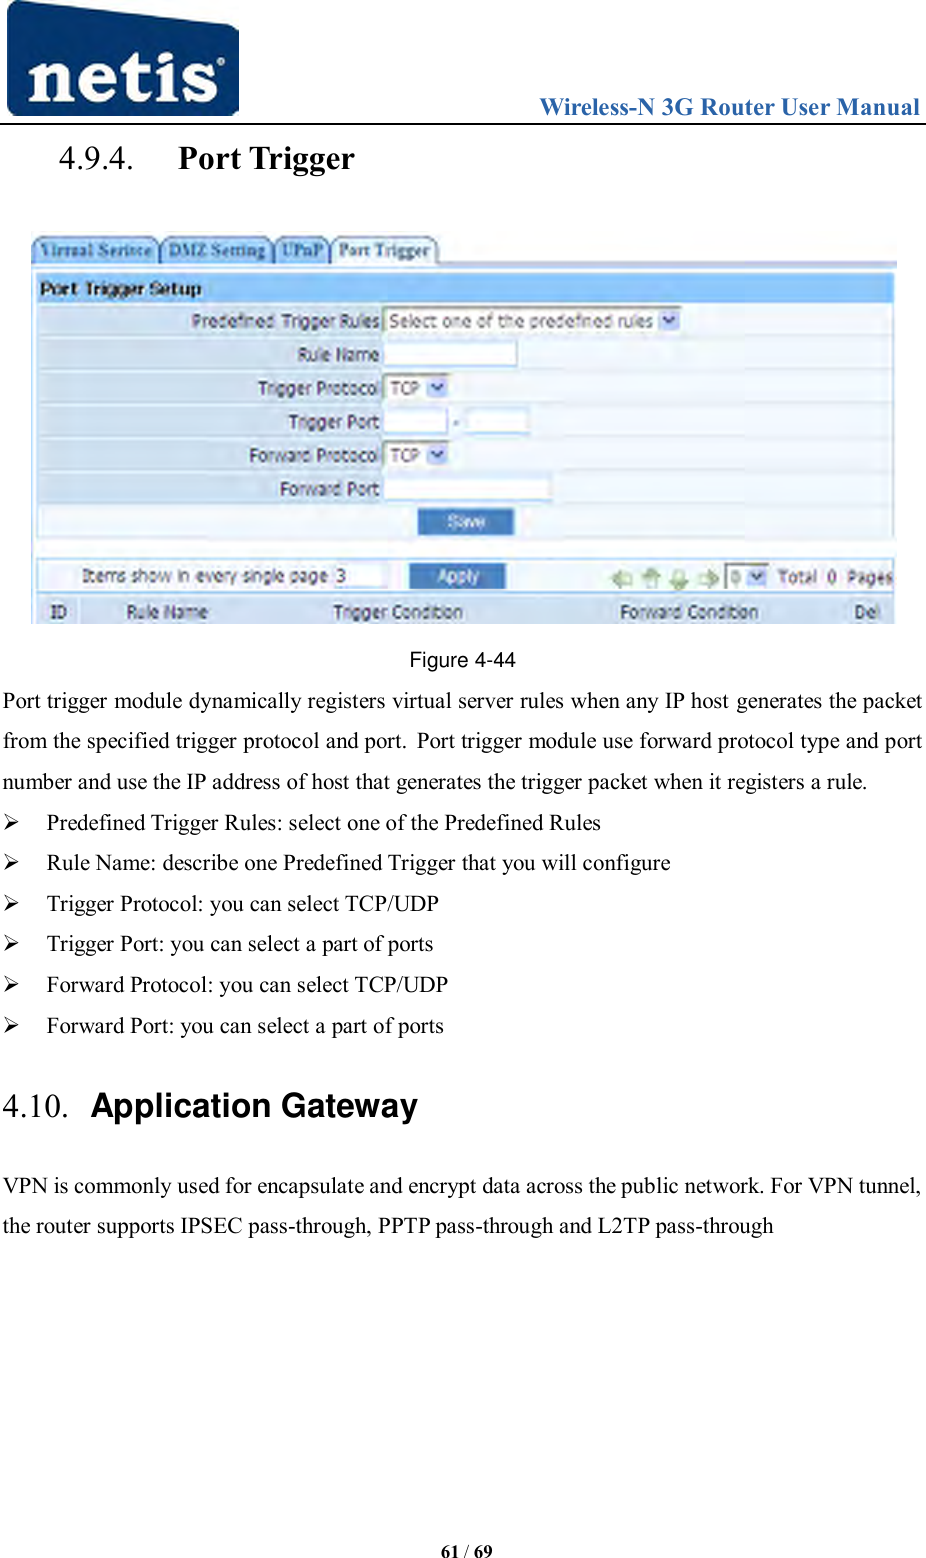                                 Wireless-N 3G Router User Manual  61 / 69 4.9.4. Port Trigger  Figure 4-44 Port trigger module dynamically registers virtual server rules when any IP host generates the packet from the specified trigger protocol and port. Port trigger module use forward protocol type and port number and use the IP address of host that generates the trigger packet when it registers a rule.  Predefined Trigger Rules: select one of the Predefined Rules  Rule Name: describe one Predefined Trigger that you will configure  Trigger Protocol: you can select TCP/UDP  Trigger Port: you can select a part of ports  Forward Protocol: you can select TCP/UDP  Forward Port: you can select a part of ports 4.10. Application Gateway VPN is commonly used for encapsulate and encrypt data across the public network. For VPN tunnel, the router supports IPSEC pass-through, PPTP pass-through and L2TP pass-through 